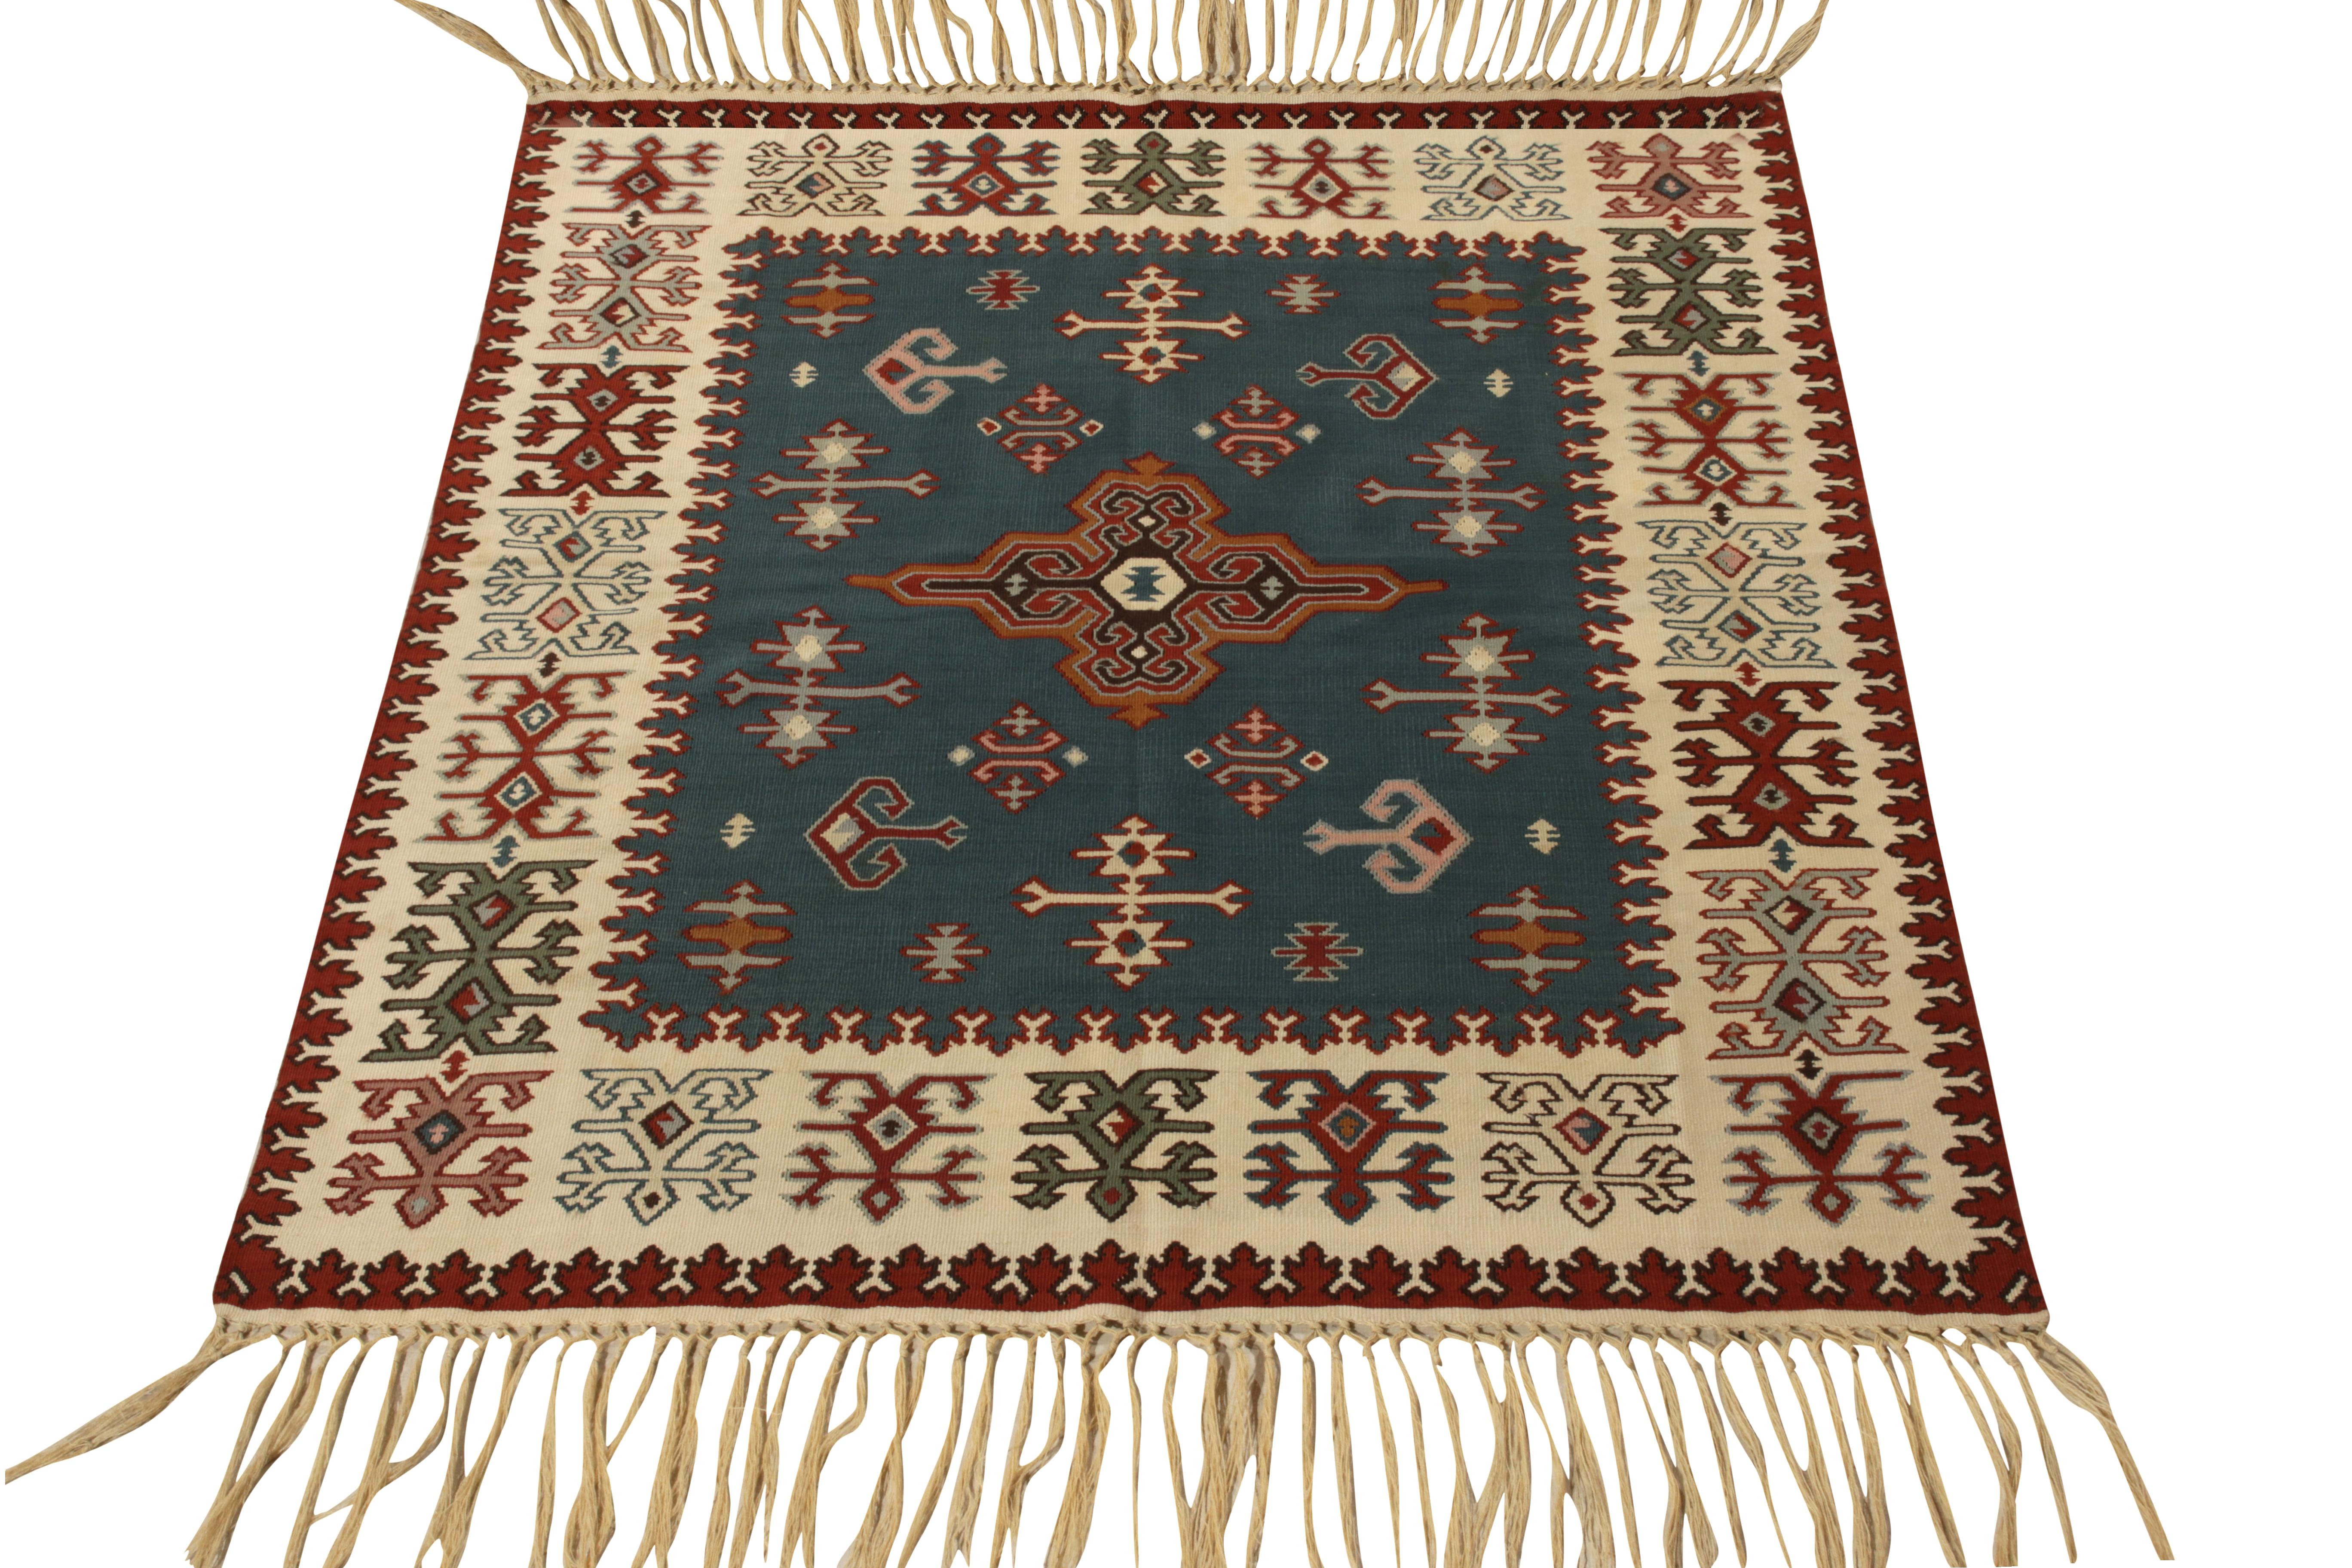 A sophisticated 4x5 Balkan piece, idyllic for an array of traditional and modern projects from Rug & Kilim’s vintage flatweave repertoire. Belonging to Turkey circa 1950-1960, the weave poses in rustic aesthetics with tribal motifs in comforting